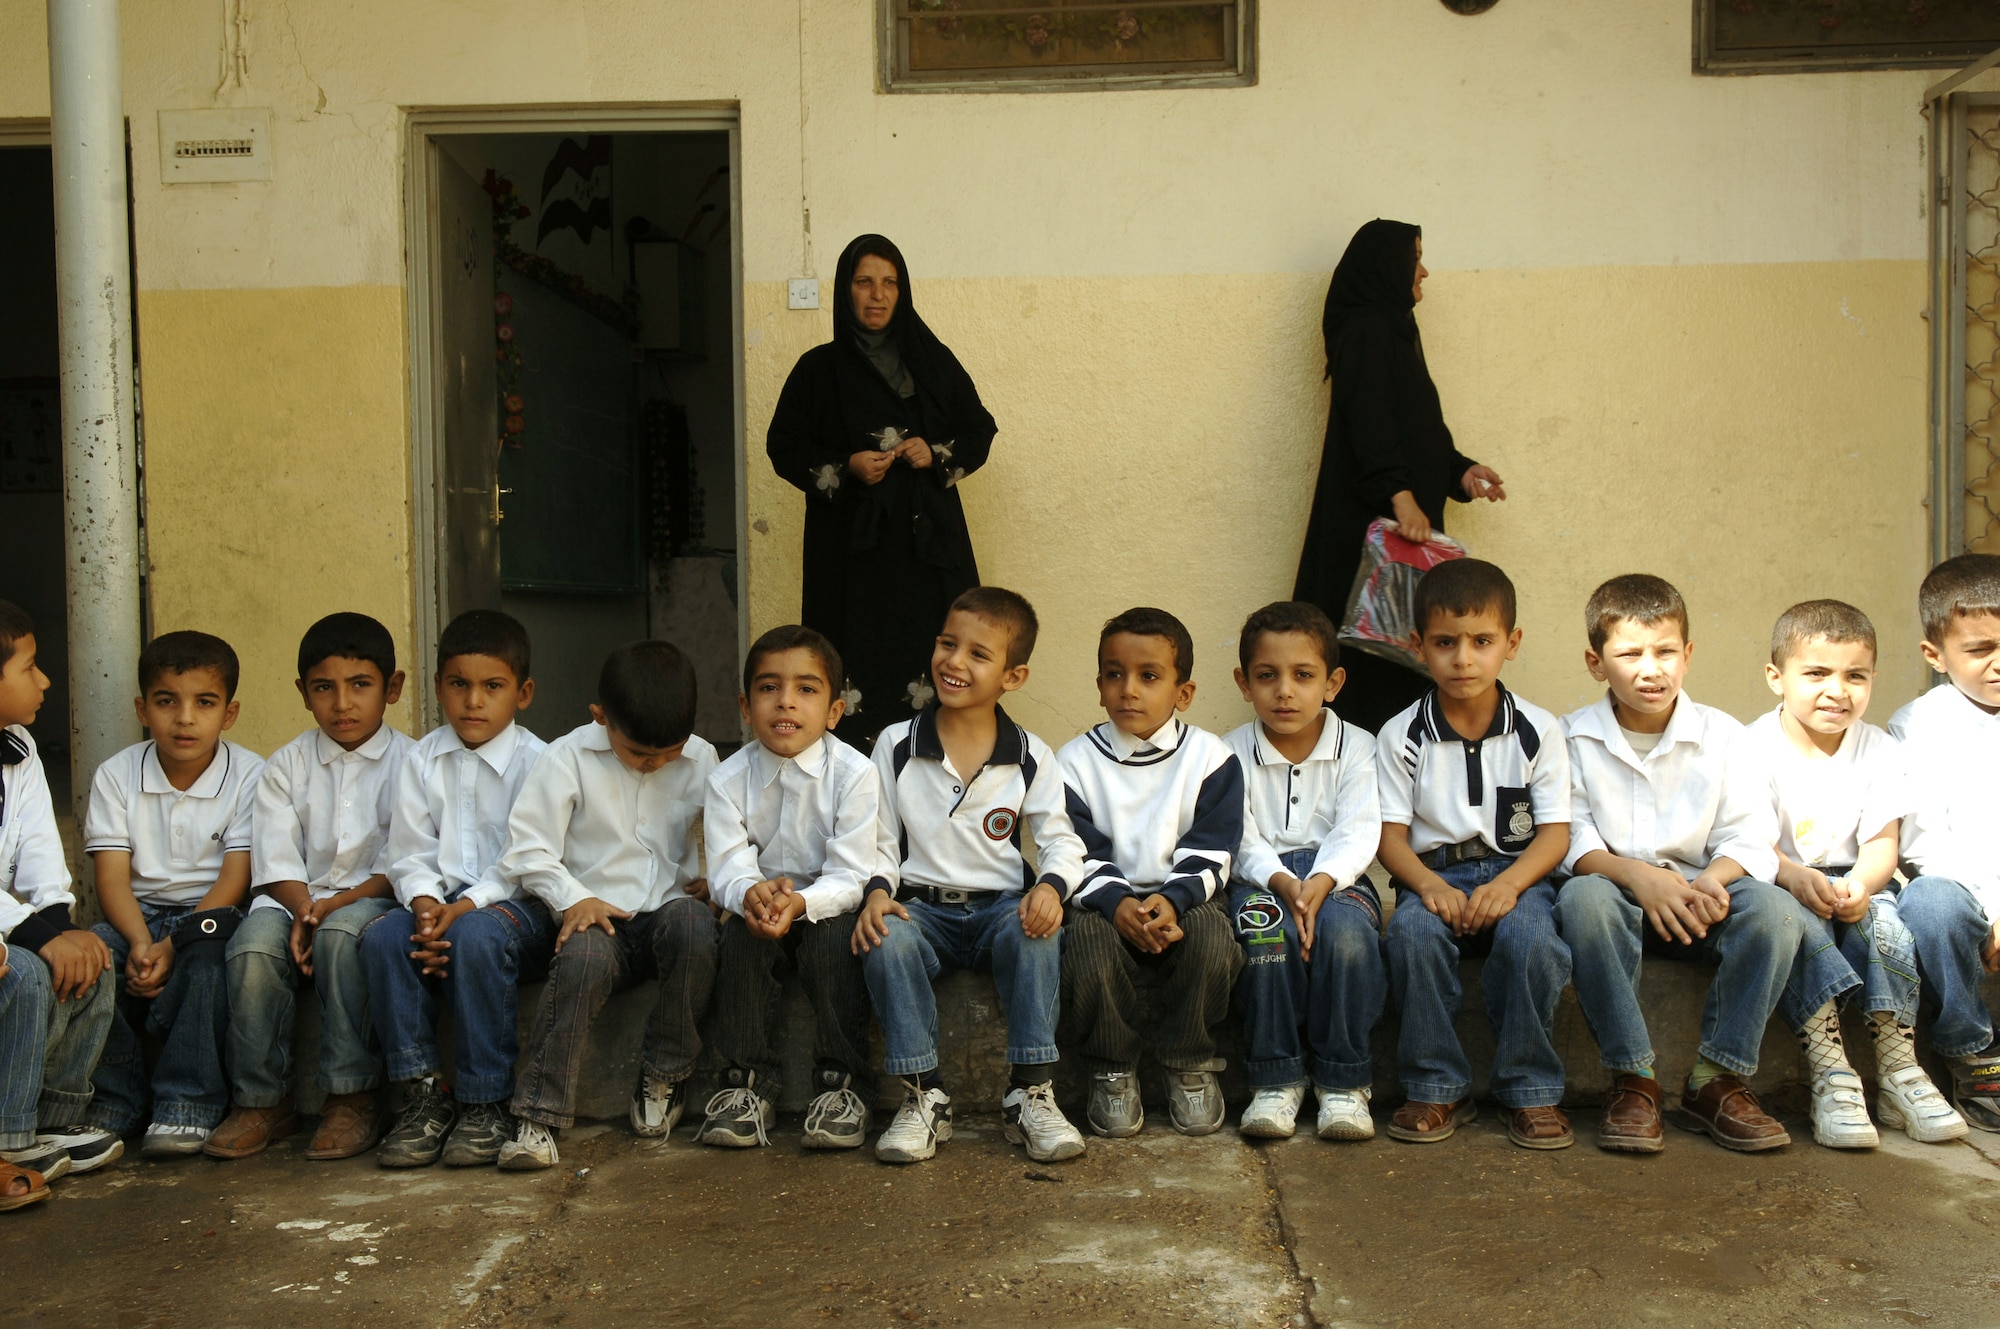 Young Iraqi students wait patiently before being given school supplies at a primary school in the Bayaa District of Baghdad, Iraq, Oct. 31. (U.S. Air Force photo/Master Sgt. Mike Buytas)